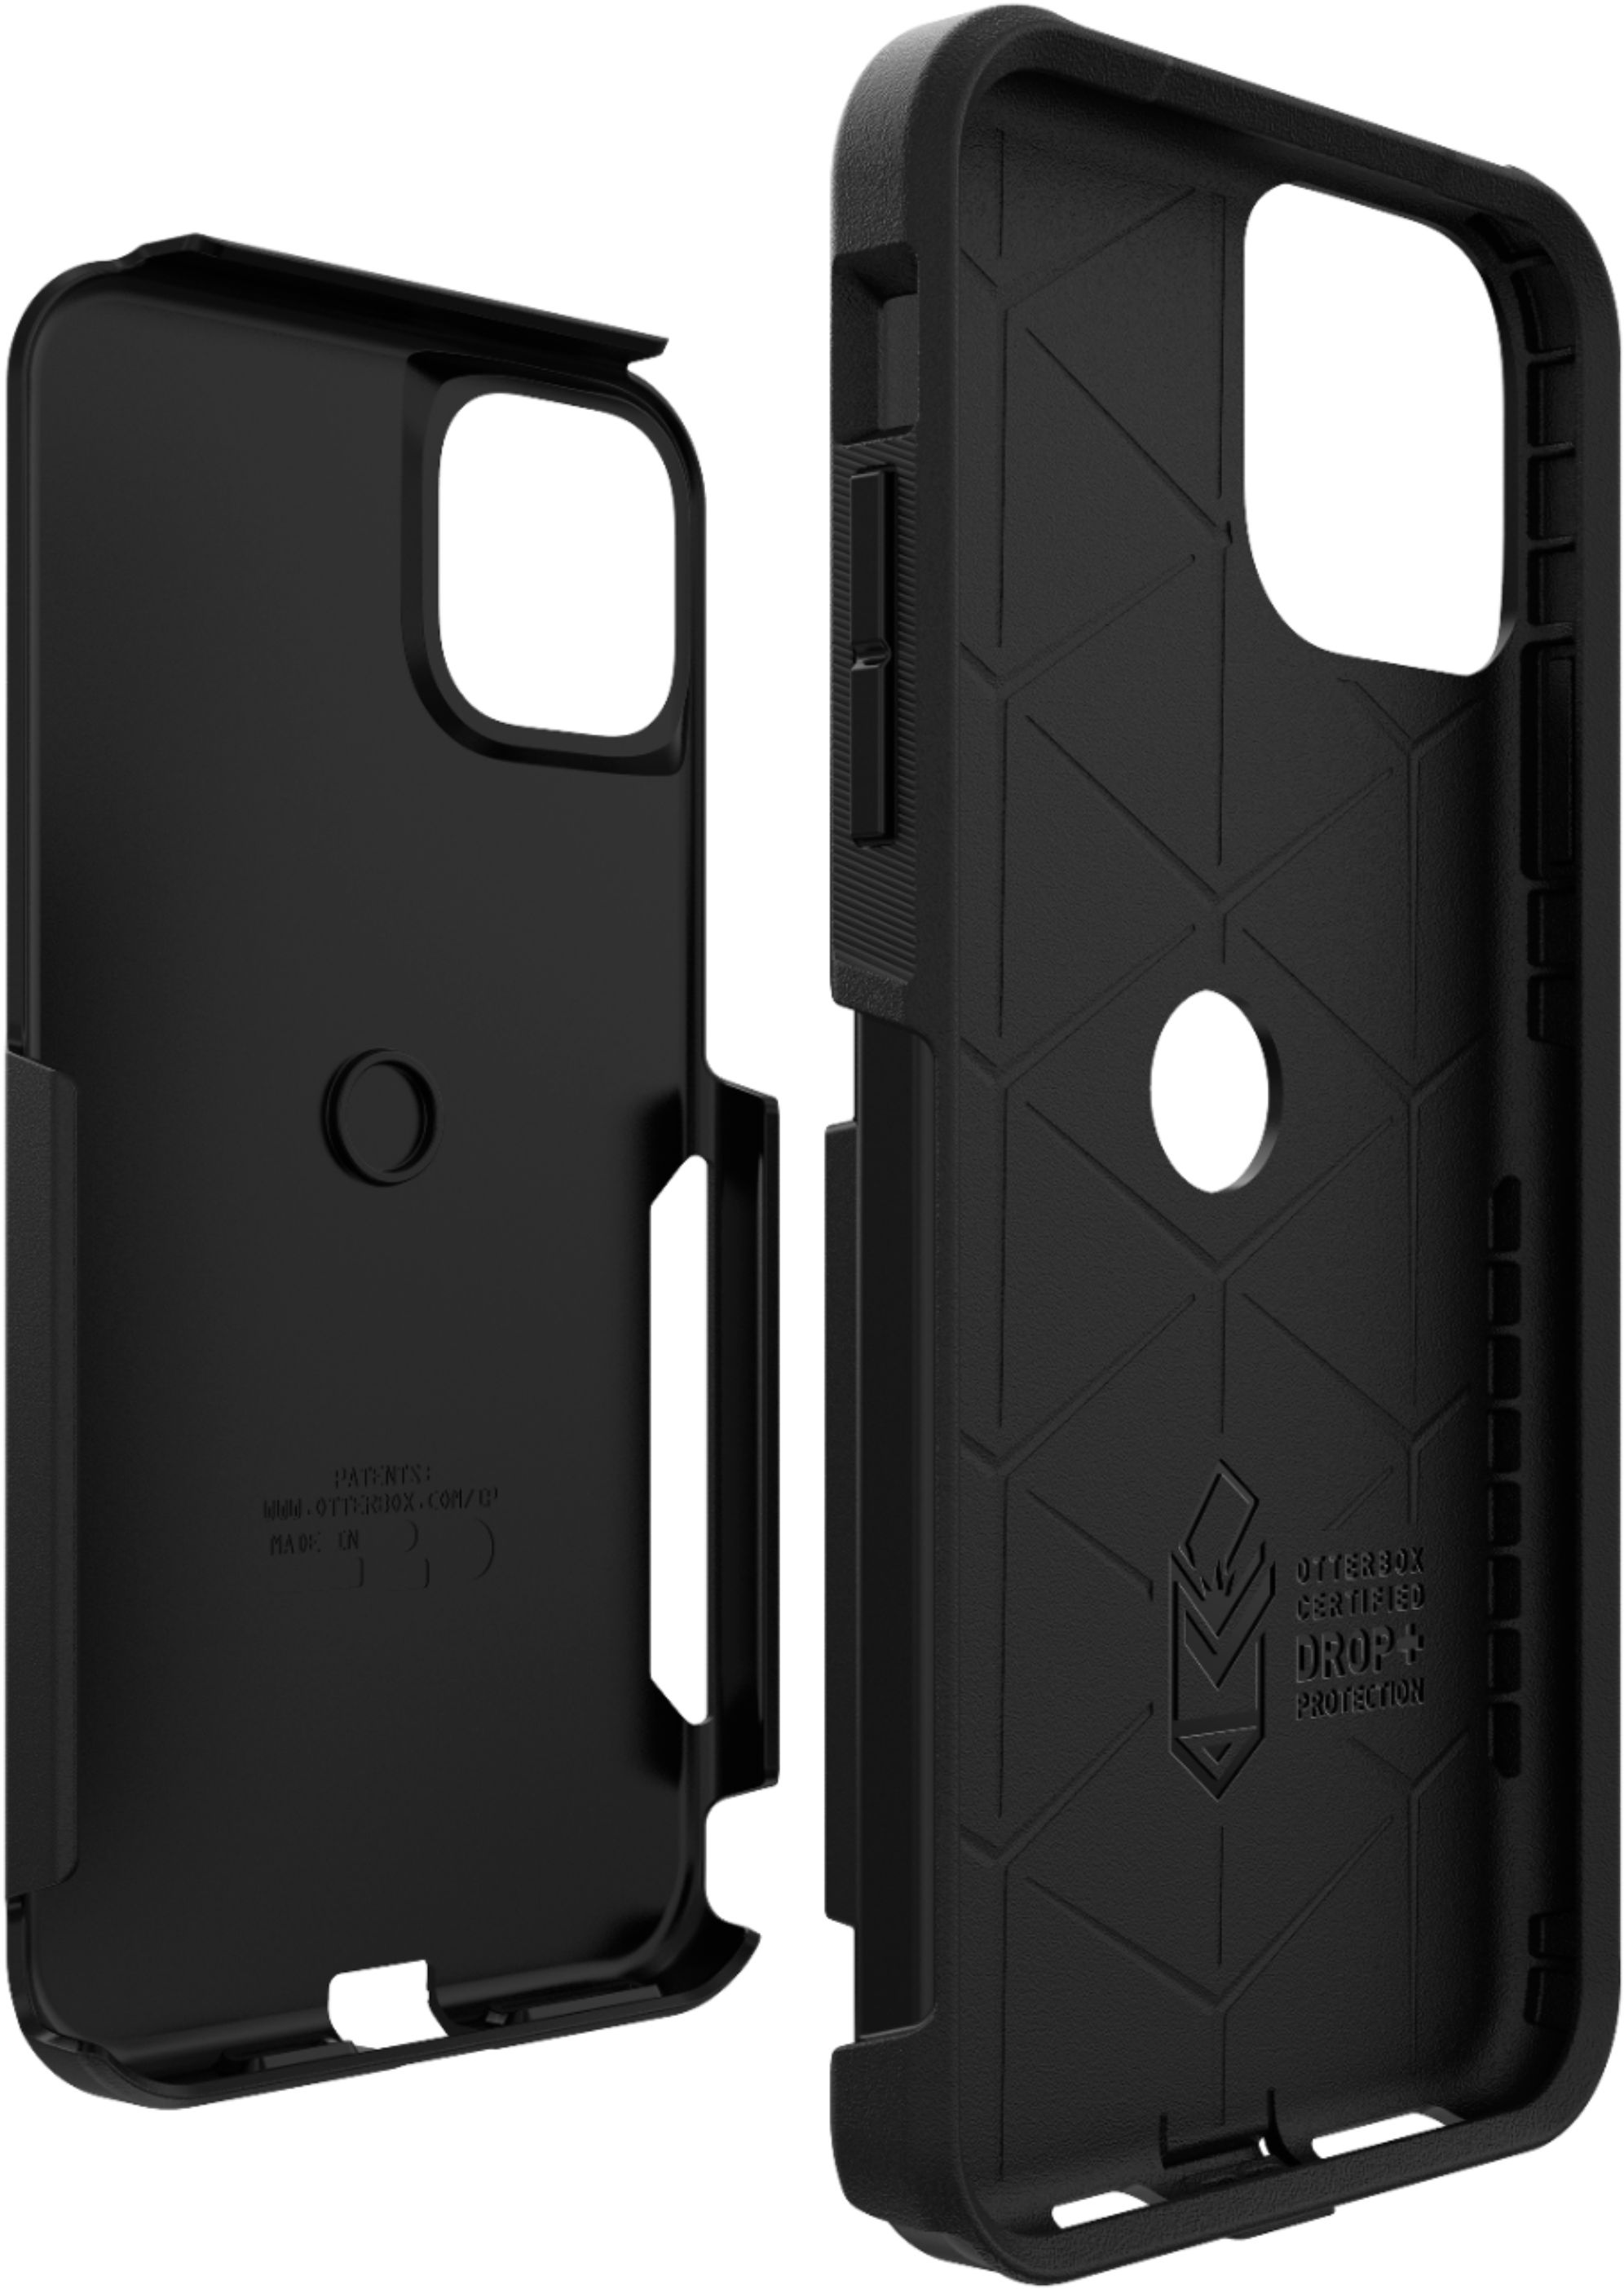 OtterBox - Defender Pro Series Case for Apple iPhone 11 Pro Max/XS Max - Black